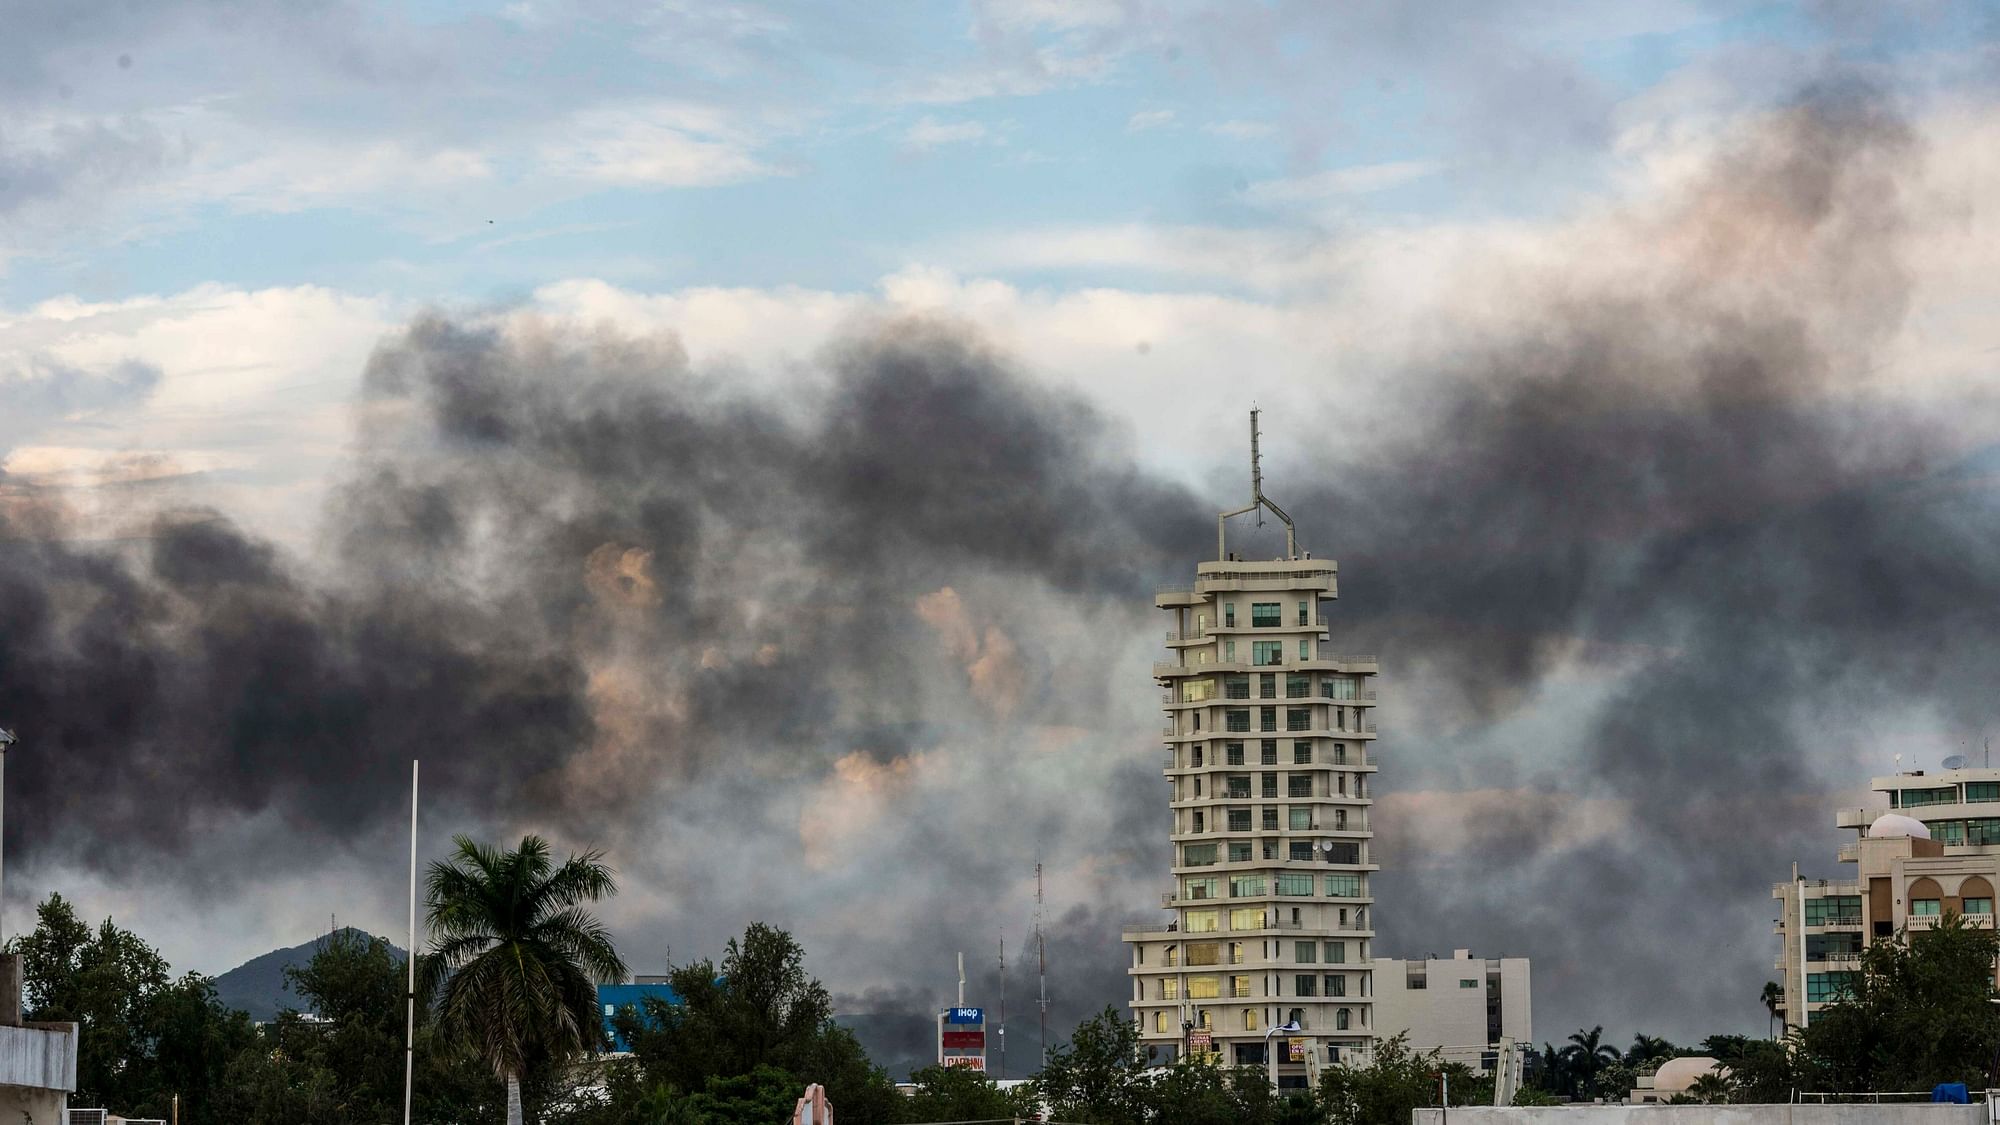 Smoke from burning cars rises after an intense gunfight broke out, burning vehicles and blocking roads in the capital of Mexico’s Sinaloa state.